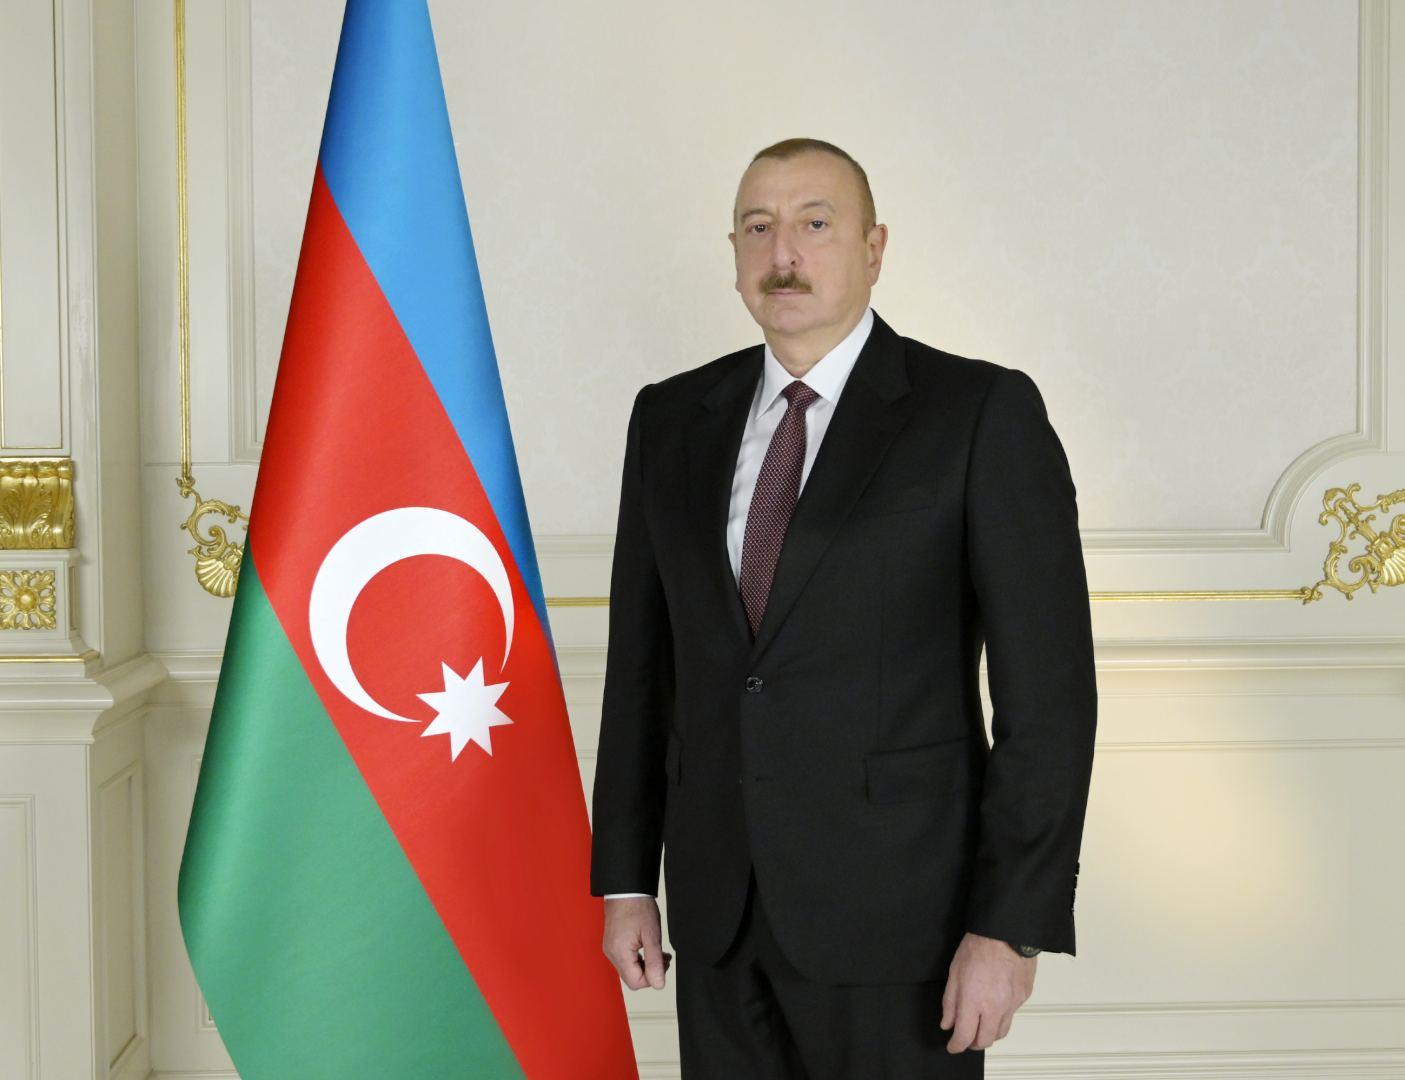 President Ilham Aliyev Signs Decree On Implementation Of Energy Law